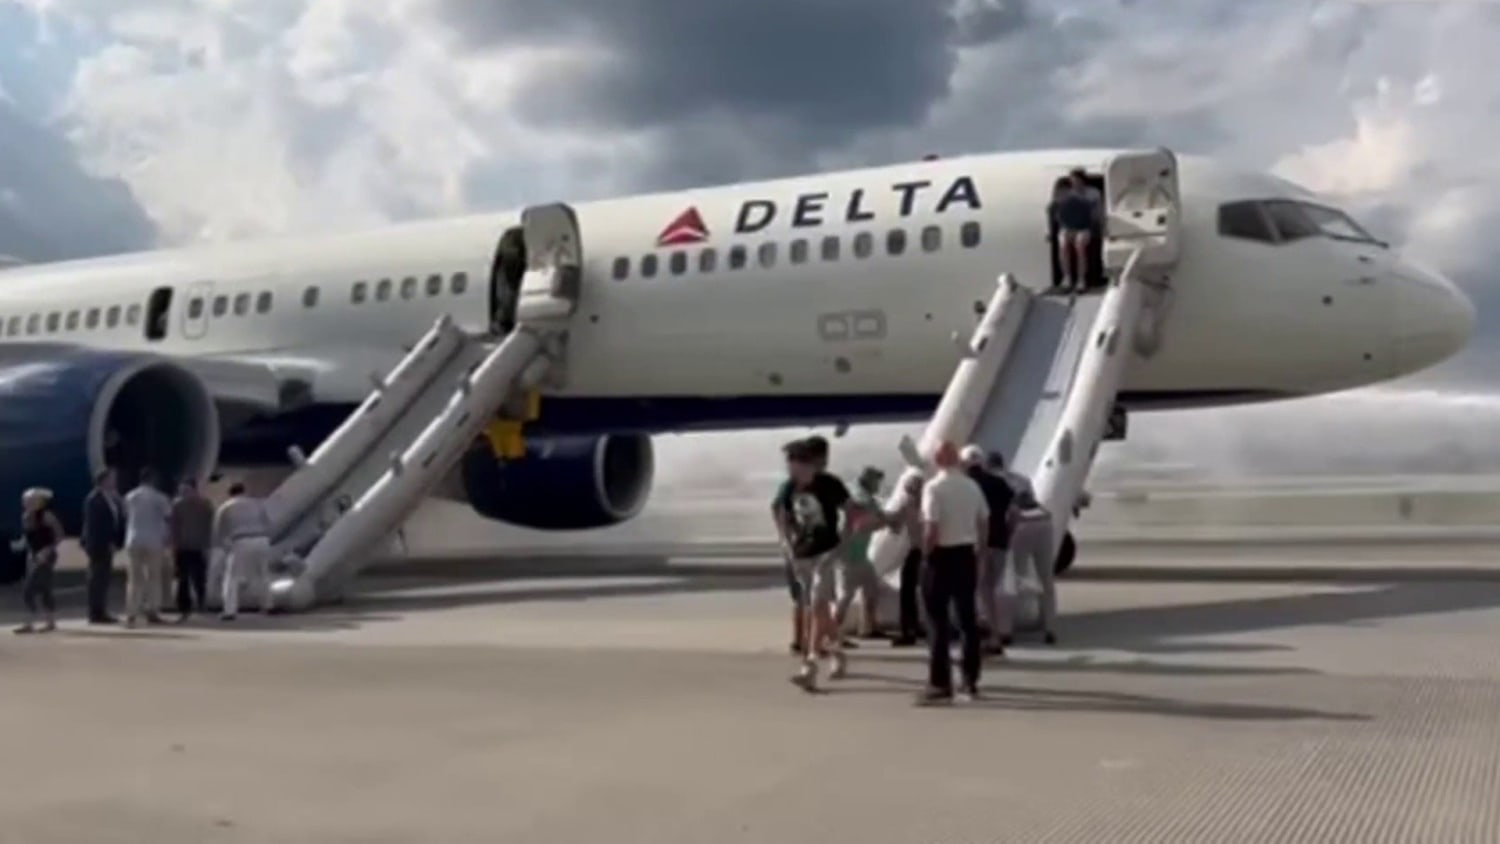 Delta passengers evacuate plane after tires blow out during landing